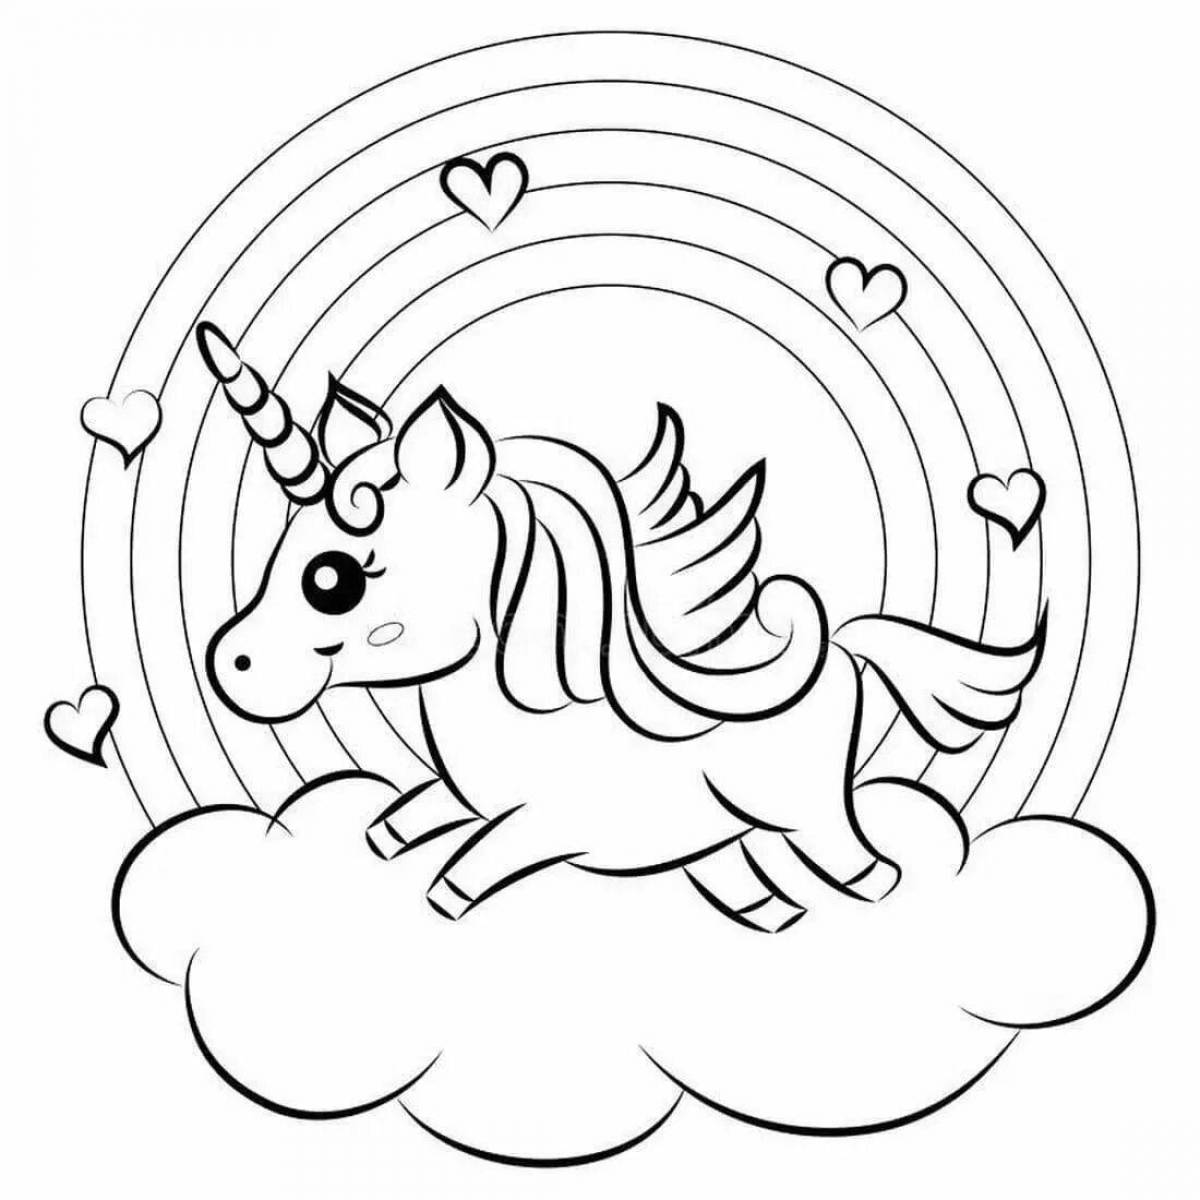 Adorable unicorn drawing for kids